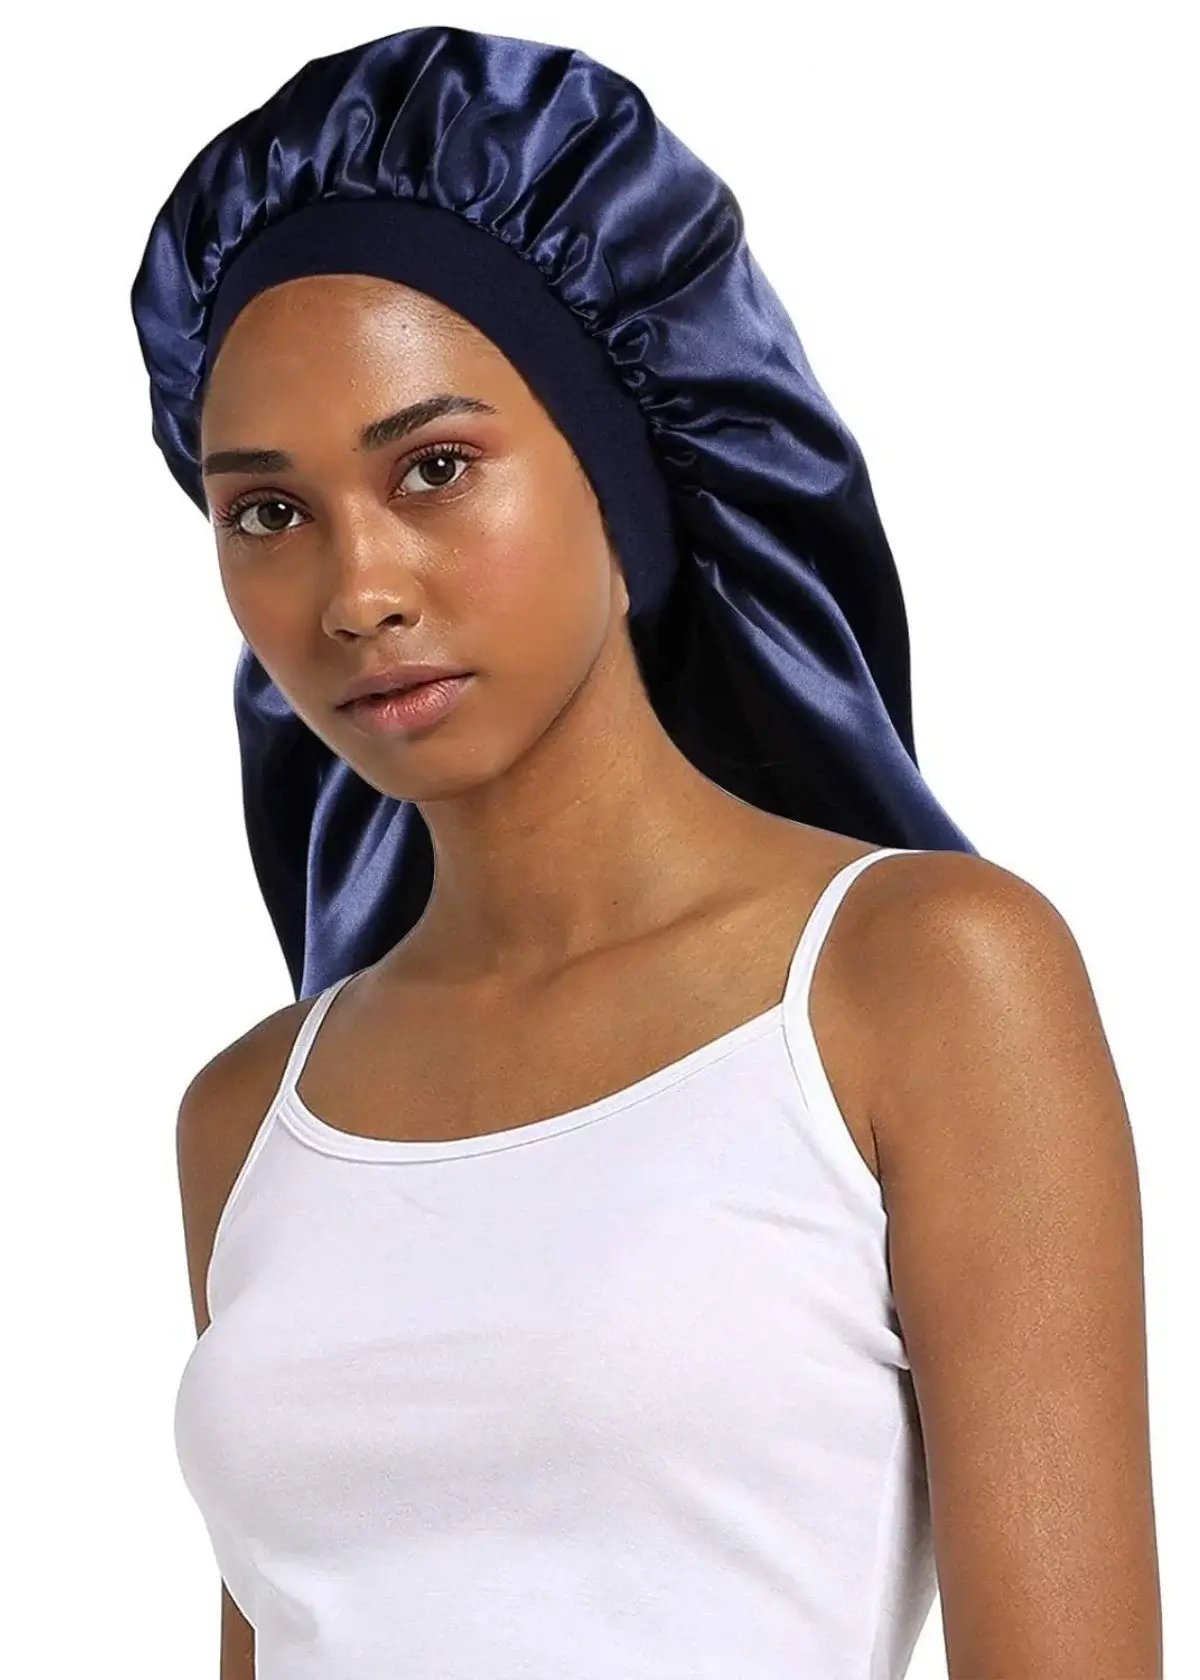 How should I wash and care for my silk bonnet?